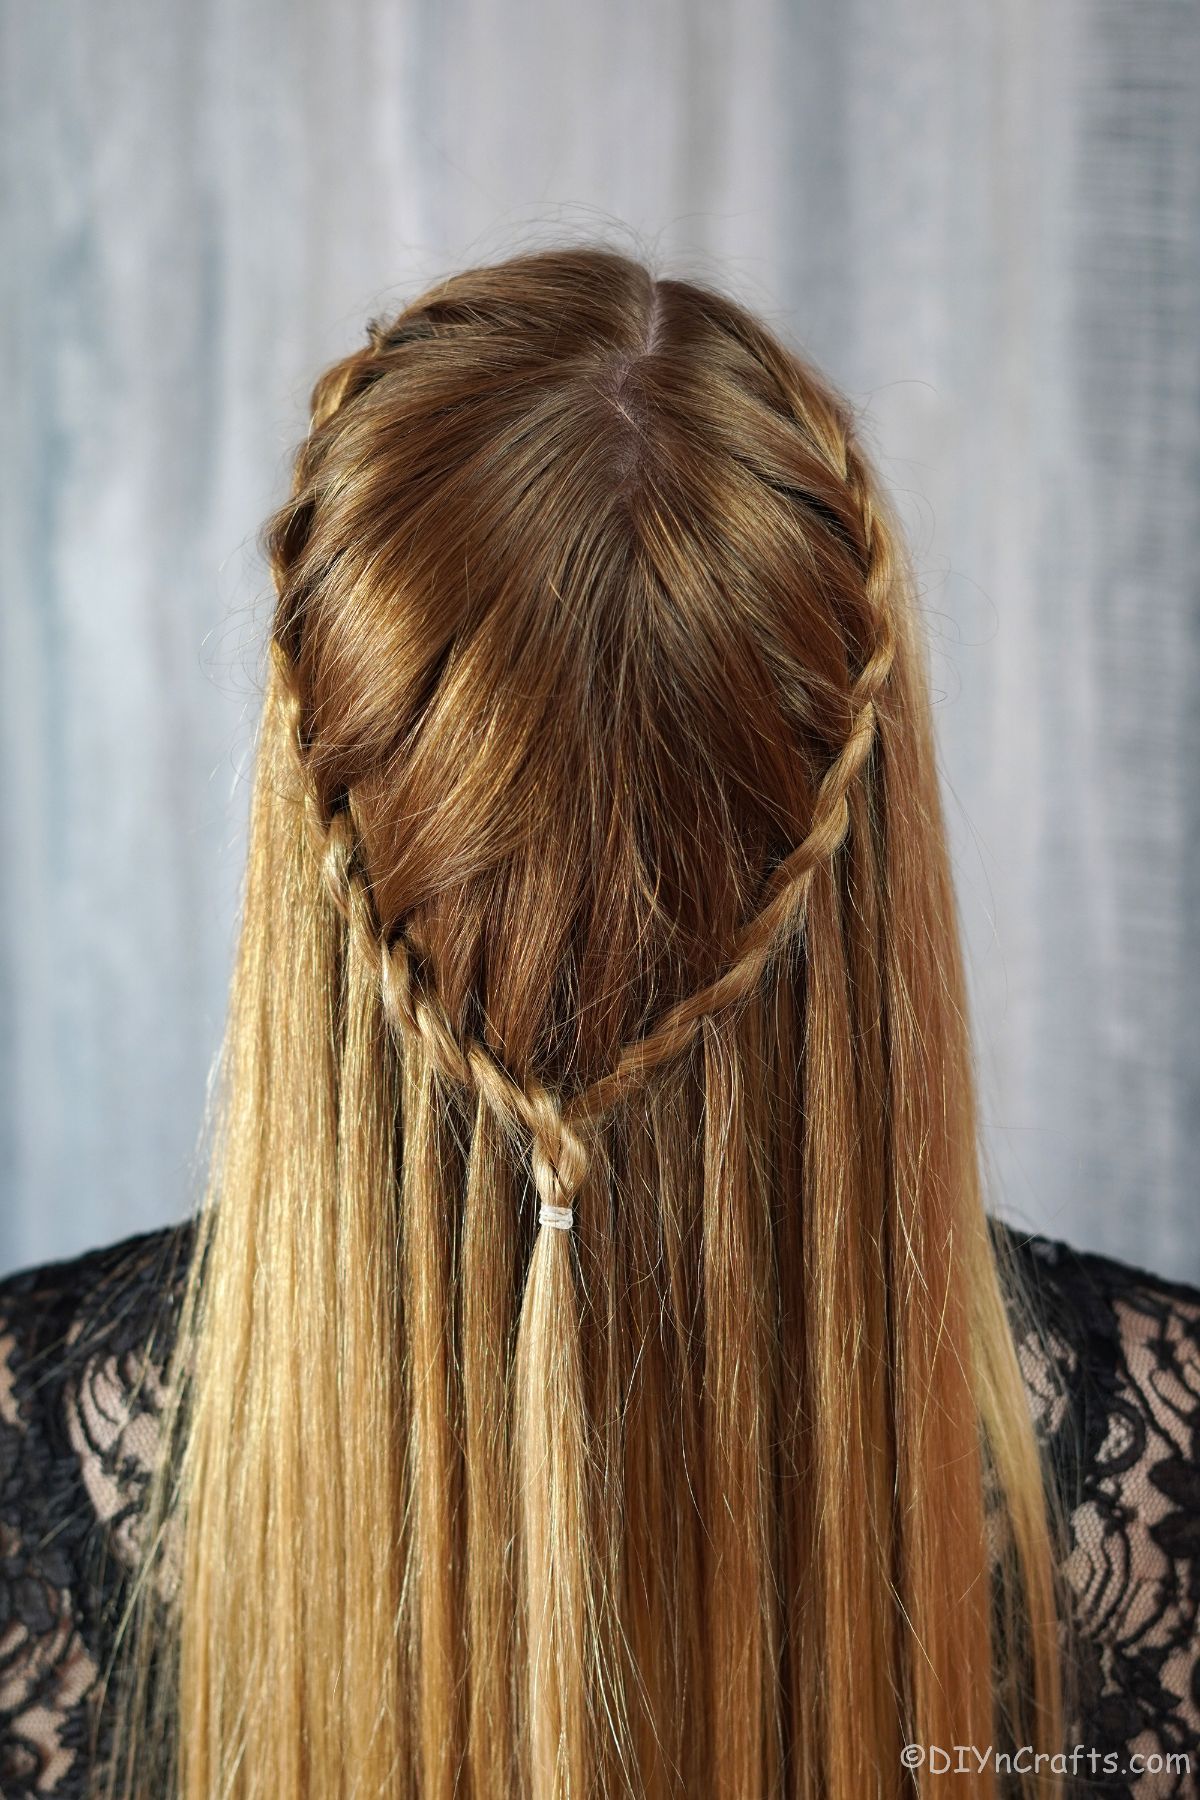 9 Waterfall Braid Tutorials Perfect For Every Occasion | Hello Glow